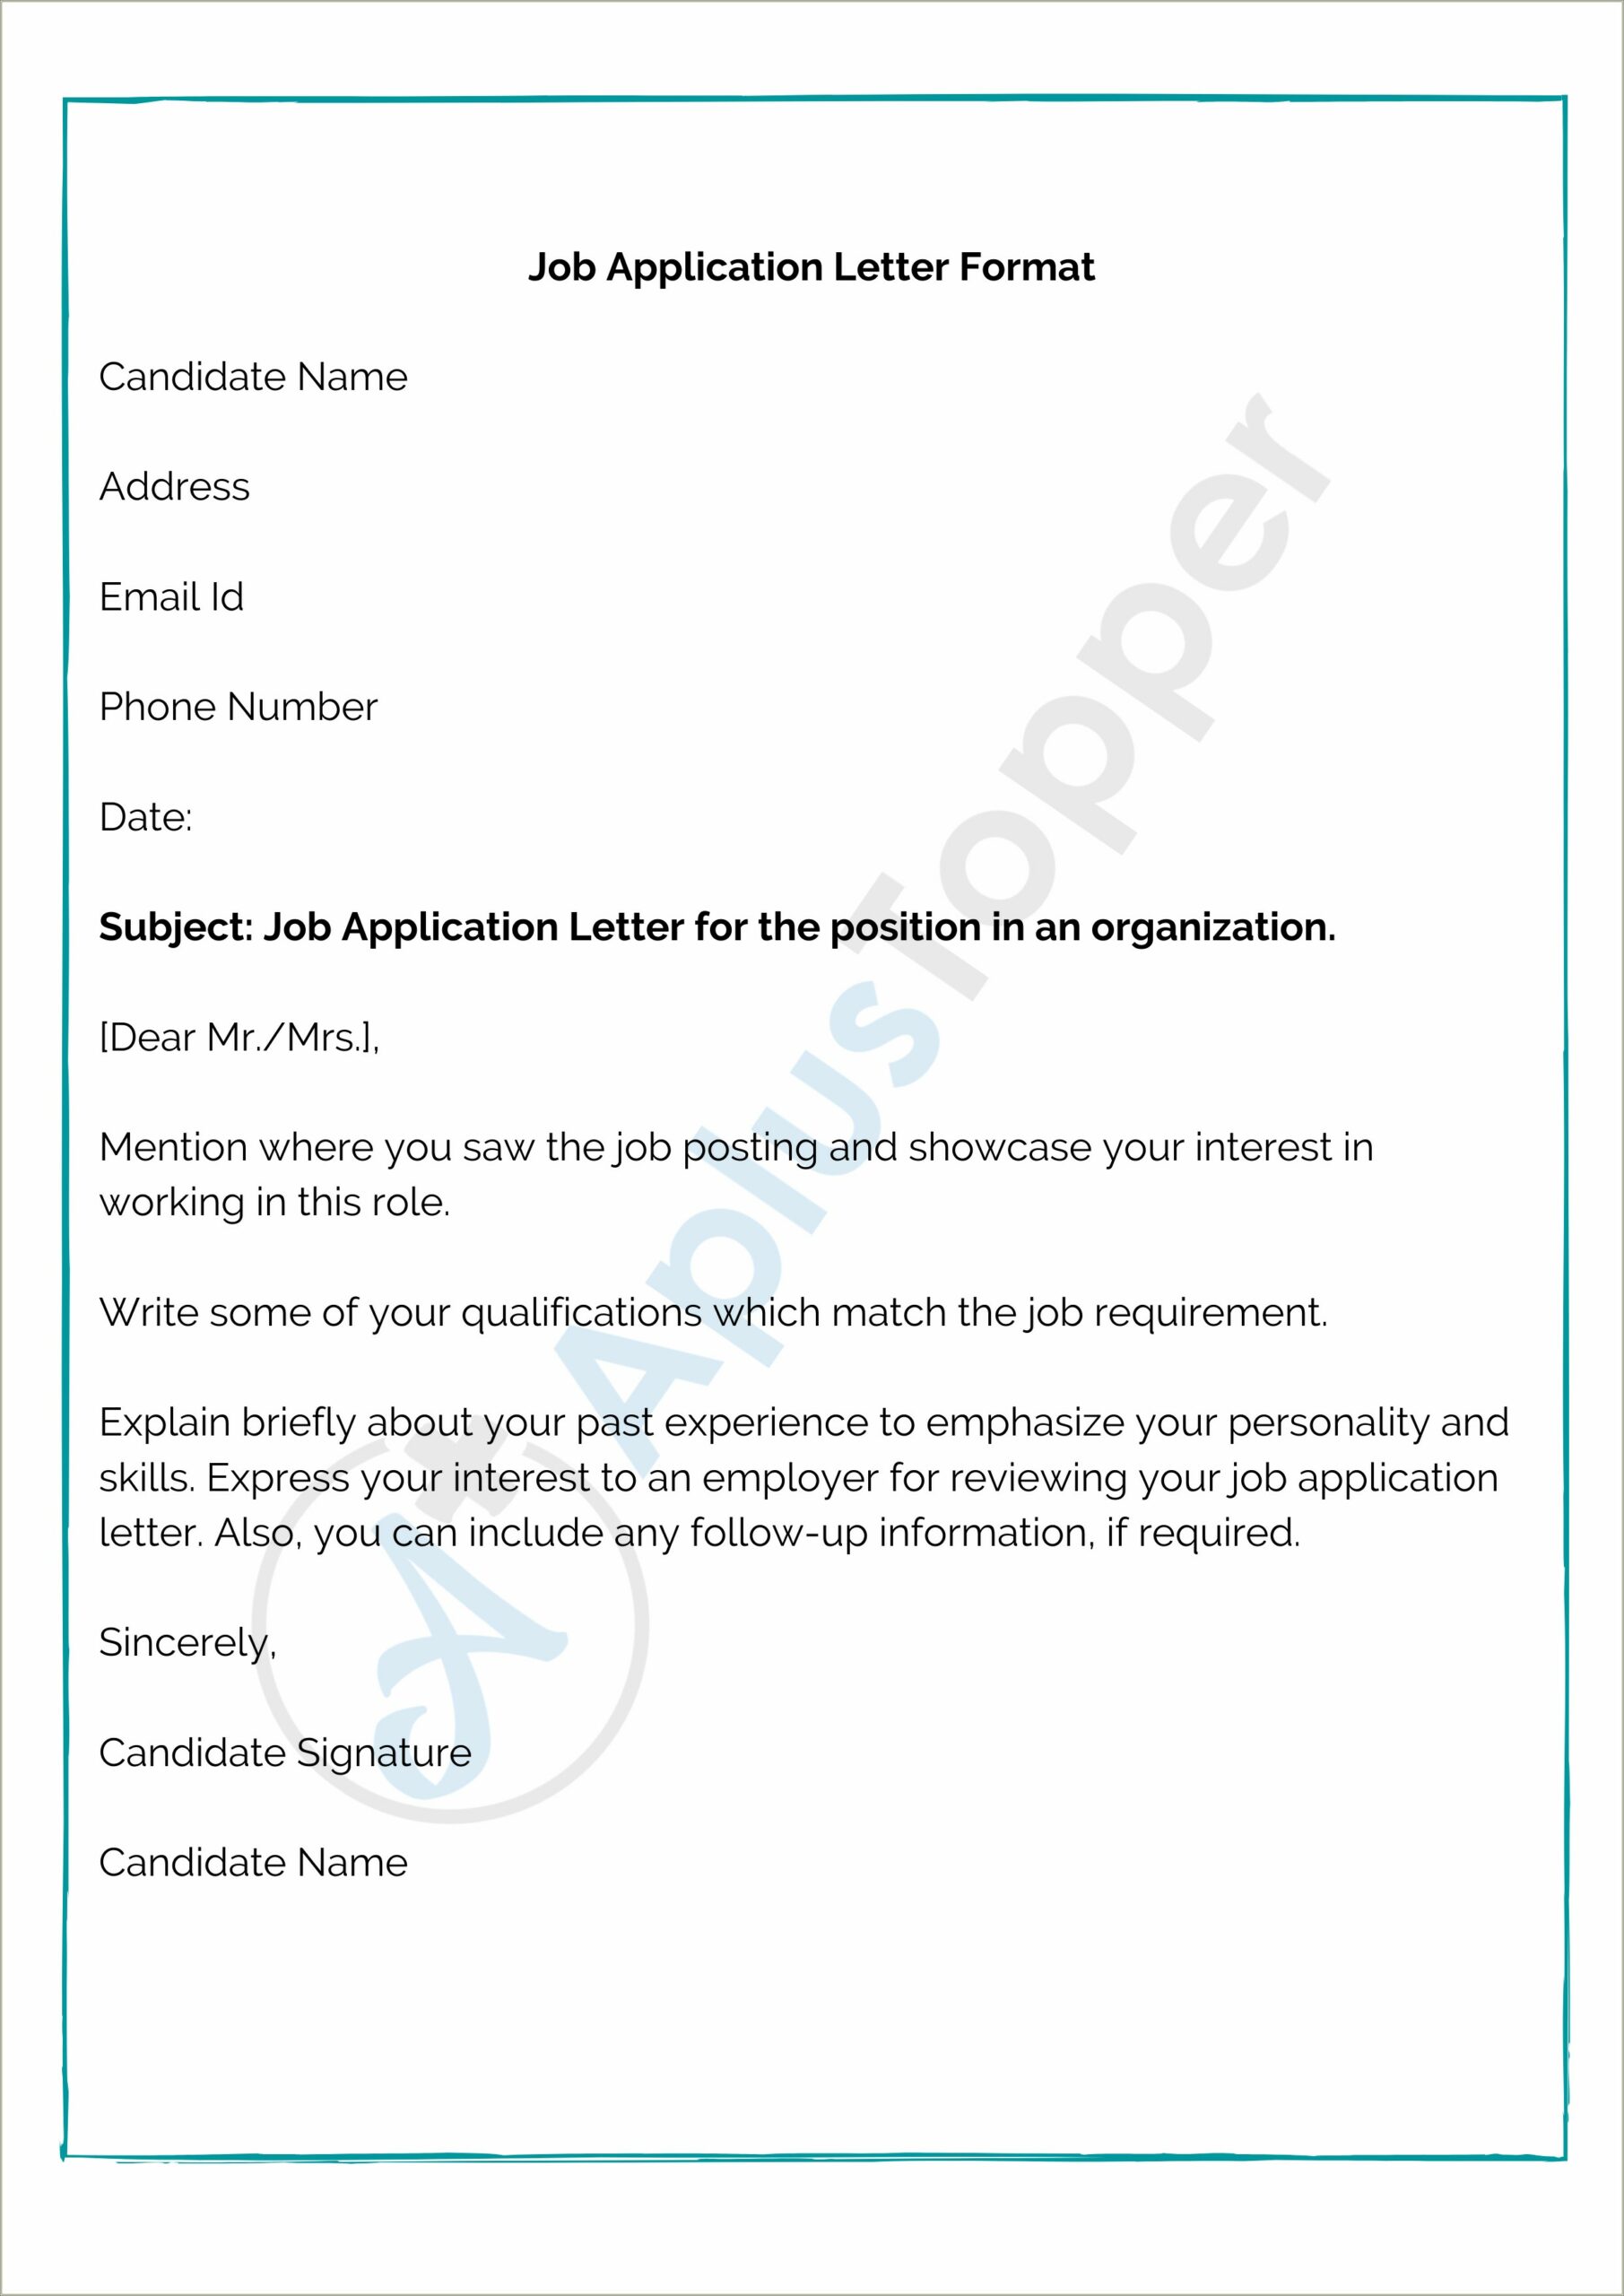 Email Format For Job Application With Resume